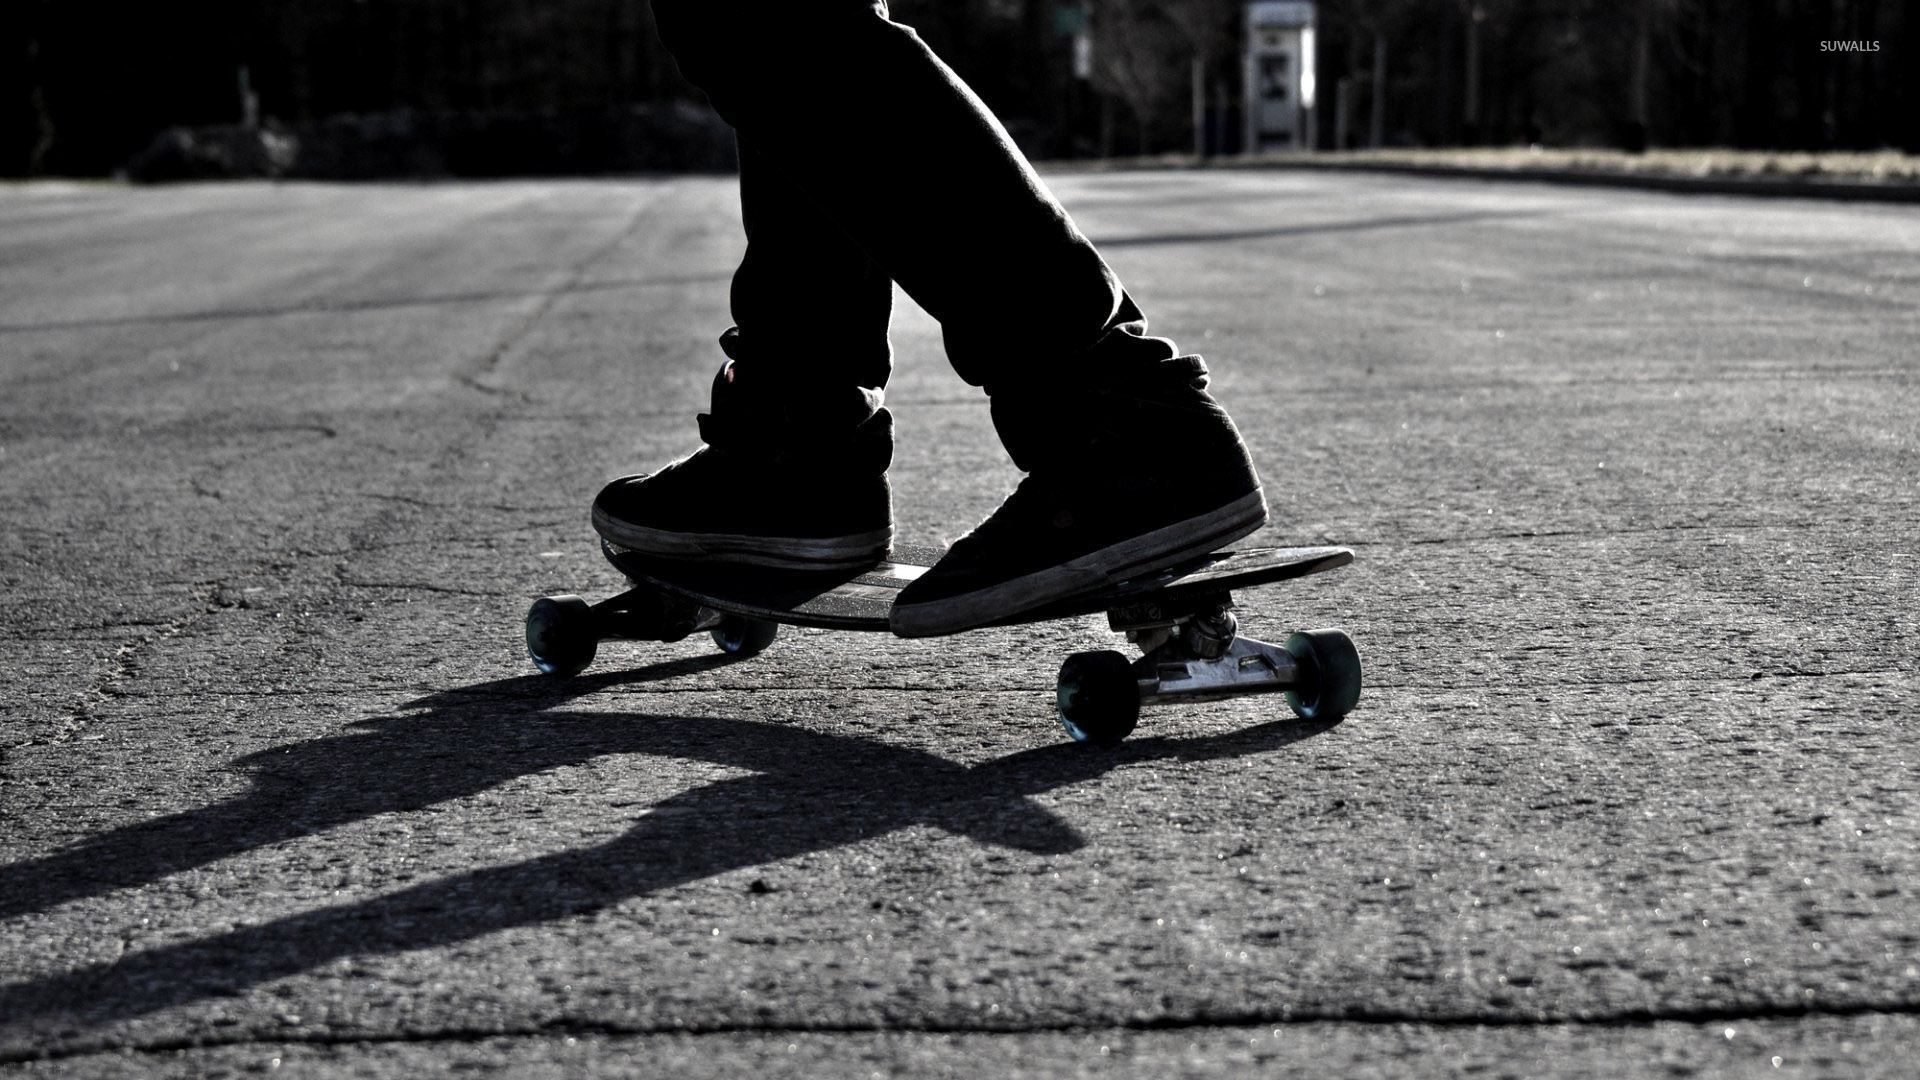 A person on skateboard in the street - Skater